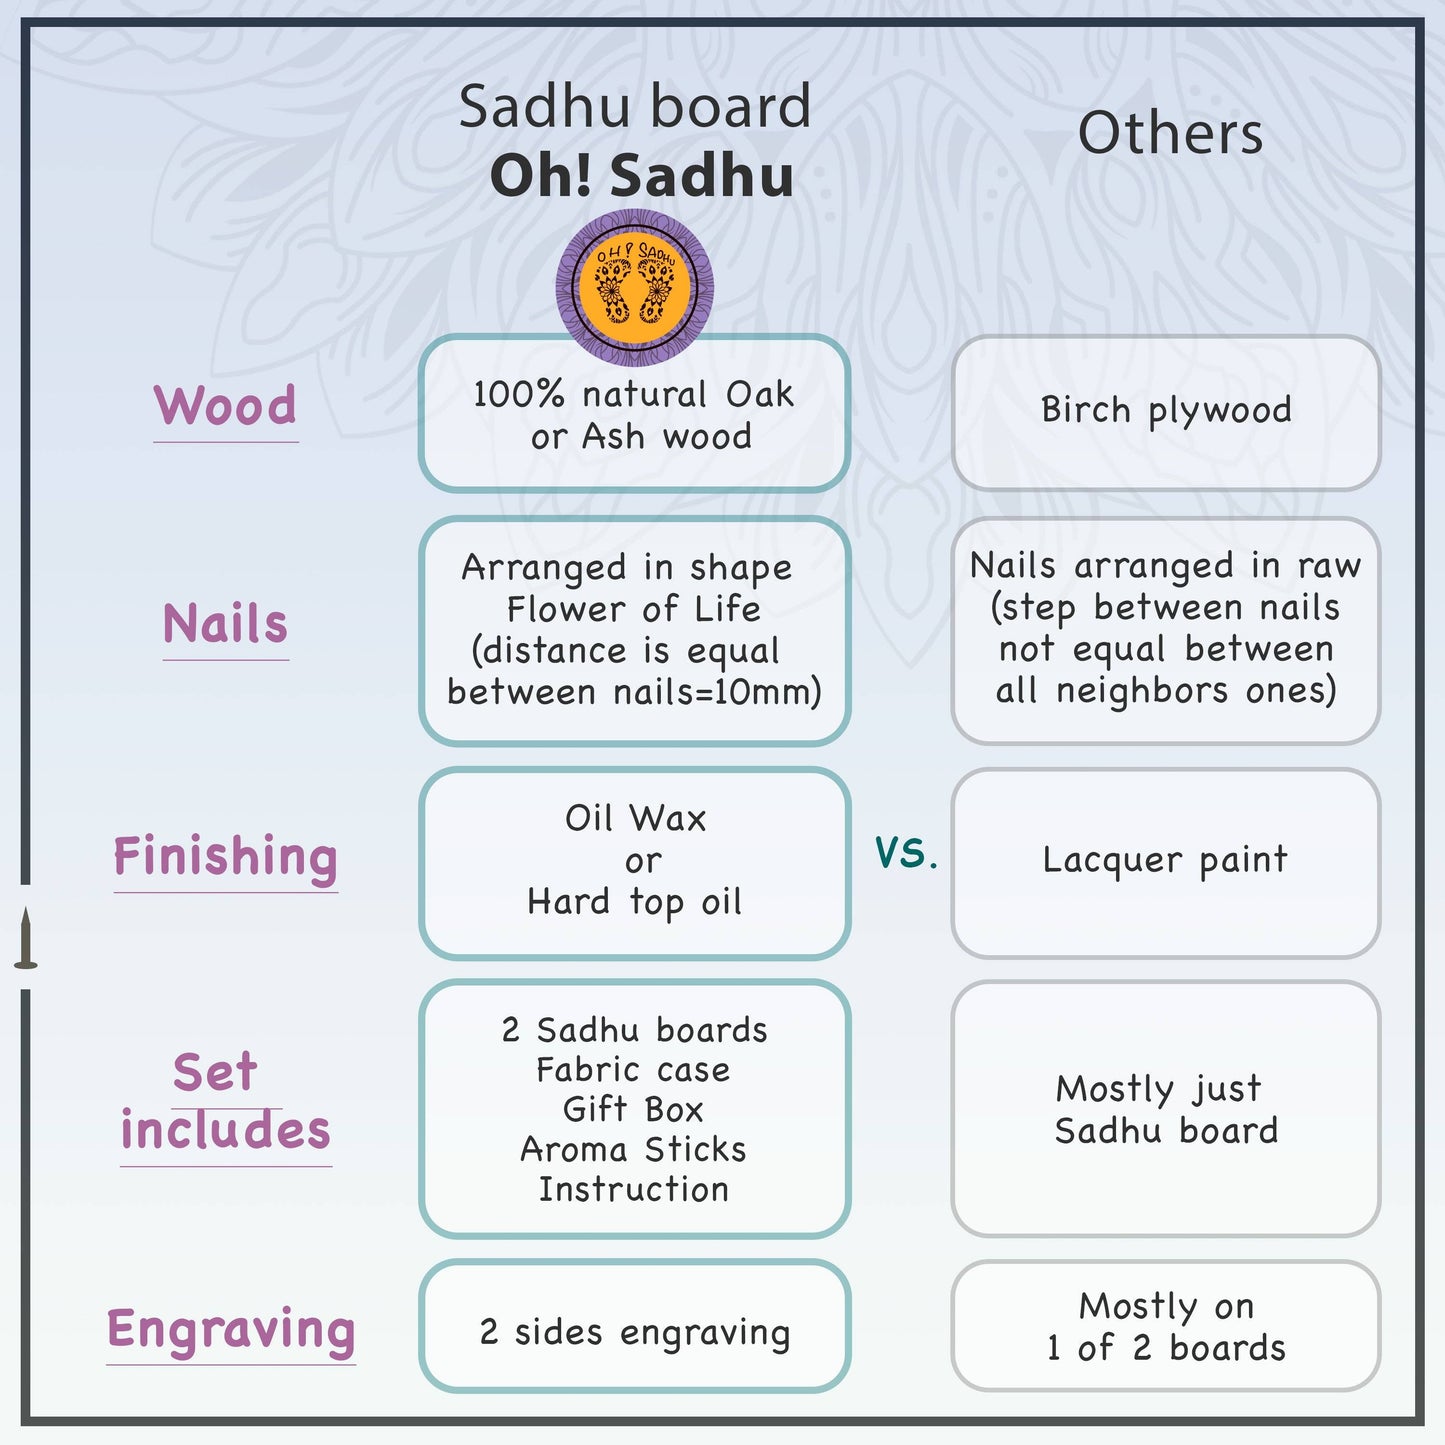 comparison table on sadhu board Oh! Sadhu and others